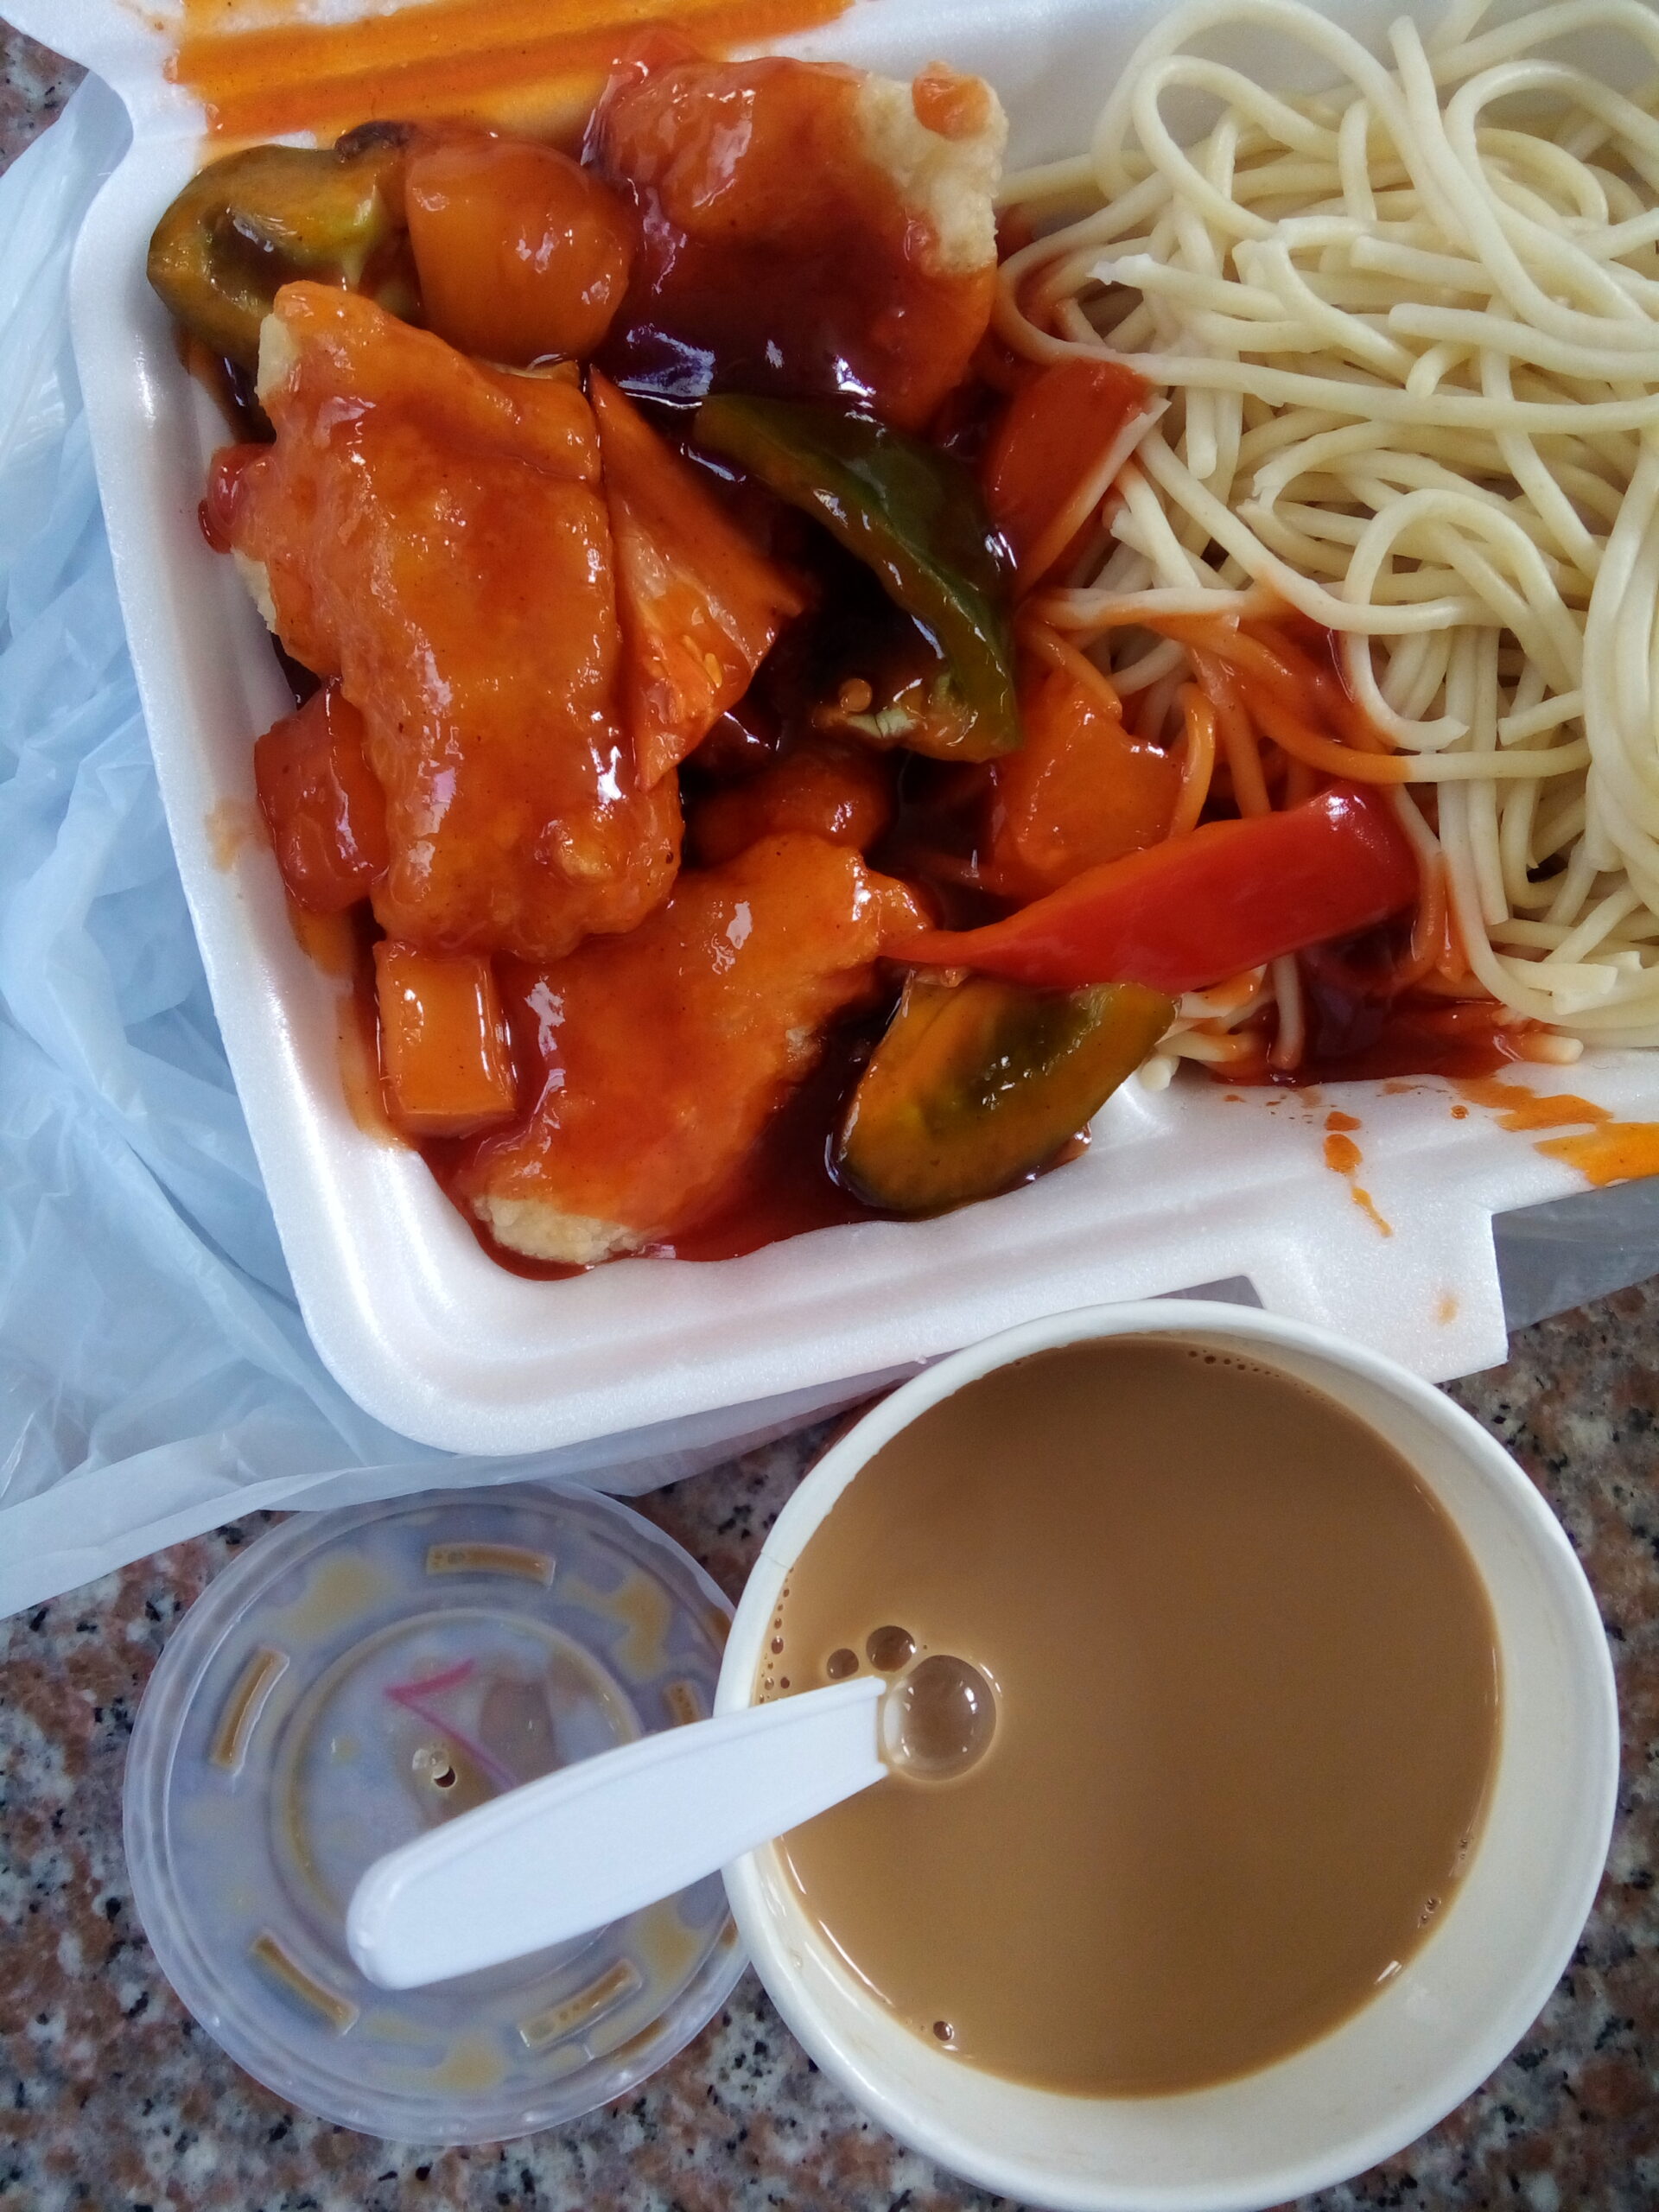 What kind of takeout do Chinese people eat?